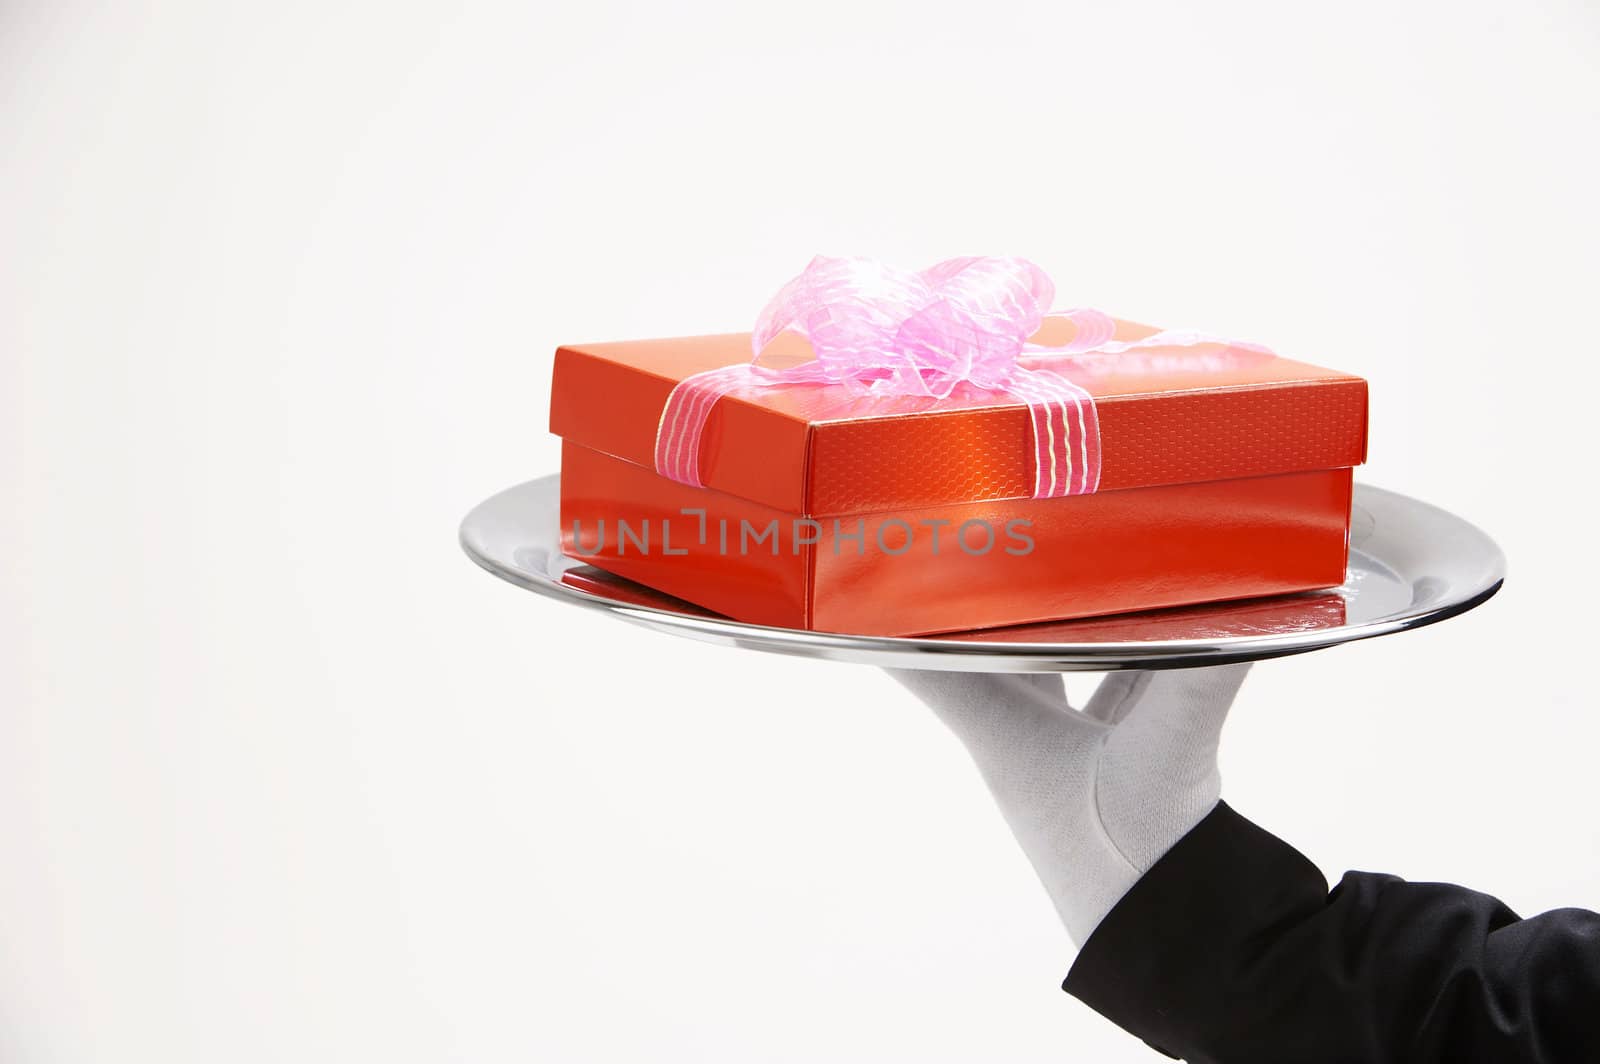 man holding exclusive presents to someone special